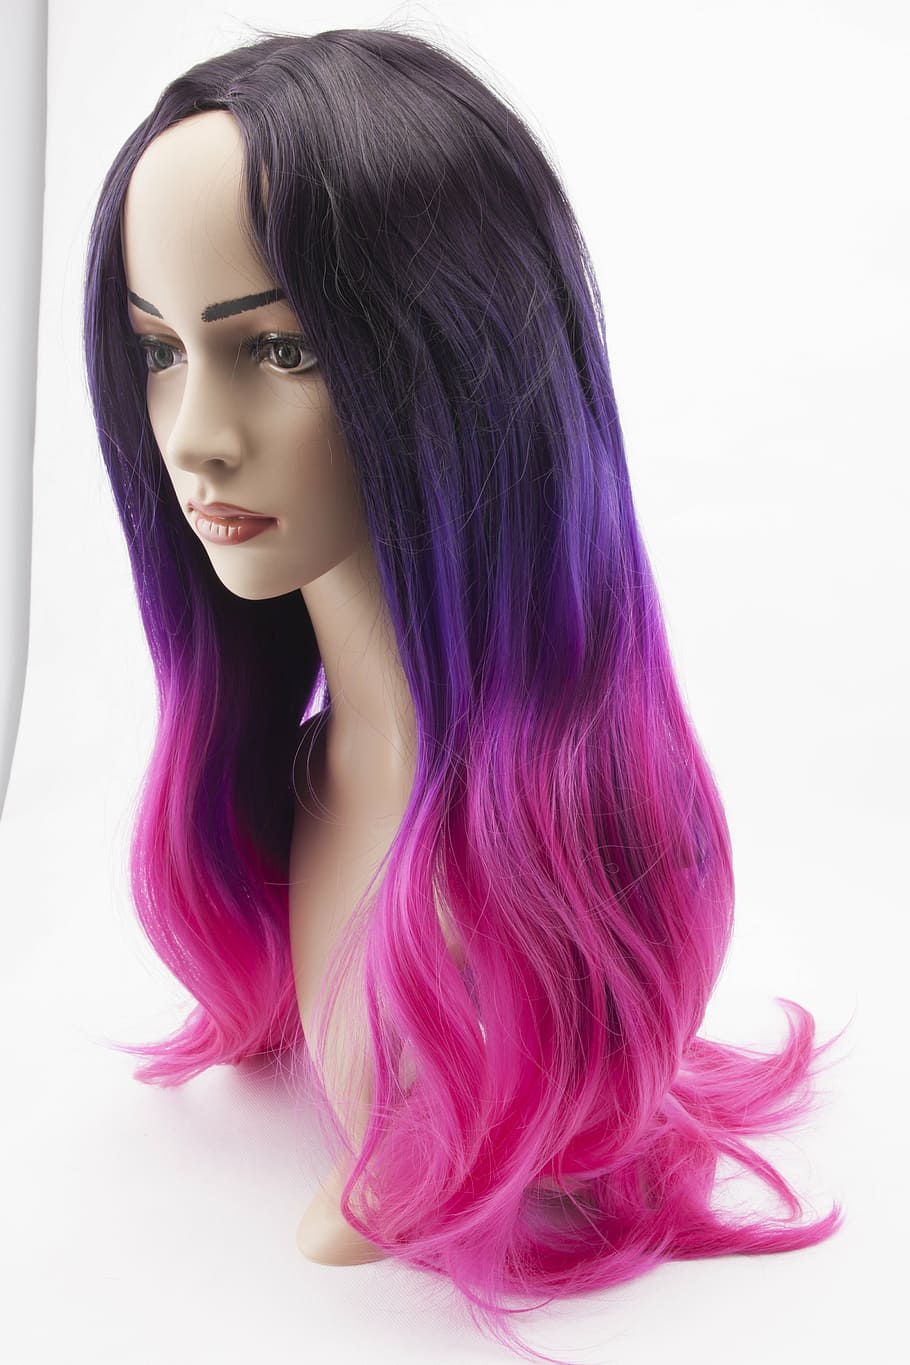 pink, purple, wig, mannequin head, cosplay, pink hair, artificial, model, hairstyle, young adult